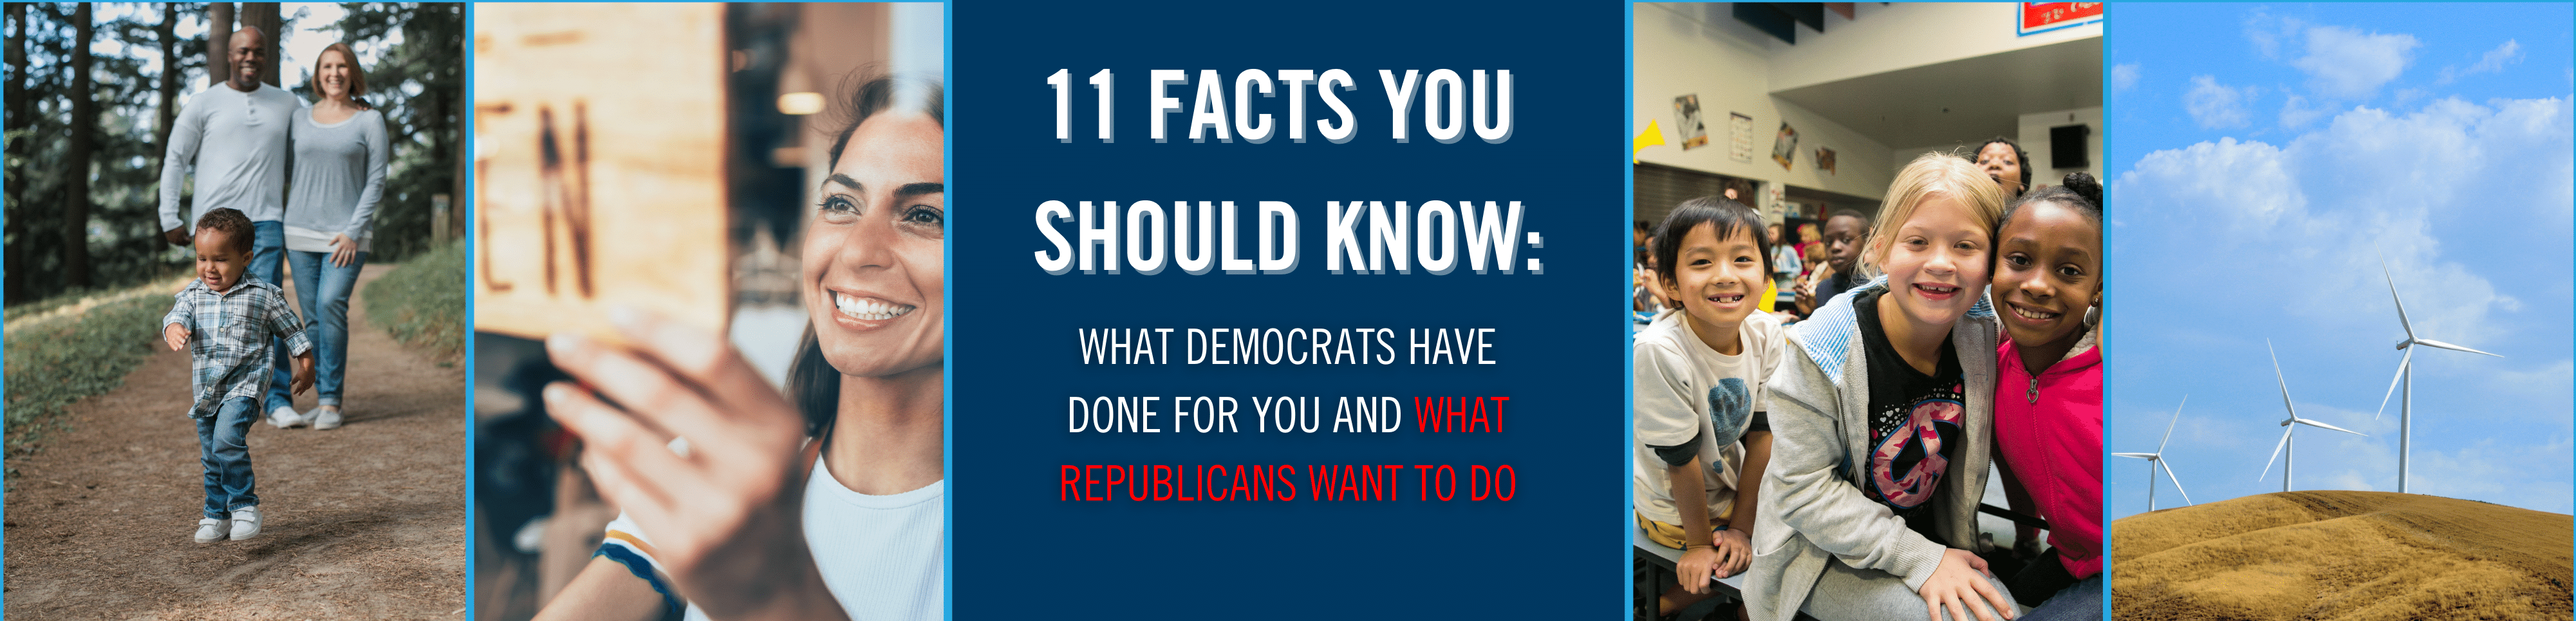 Legislative Democrats are working on behalf of you and your family. You can read more about the work Democrats have done and the bills Republicans proposed that Democrats opposed.